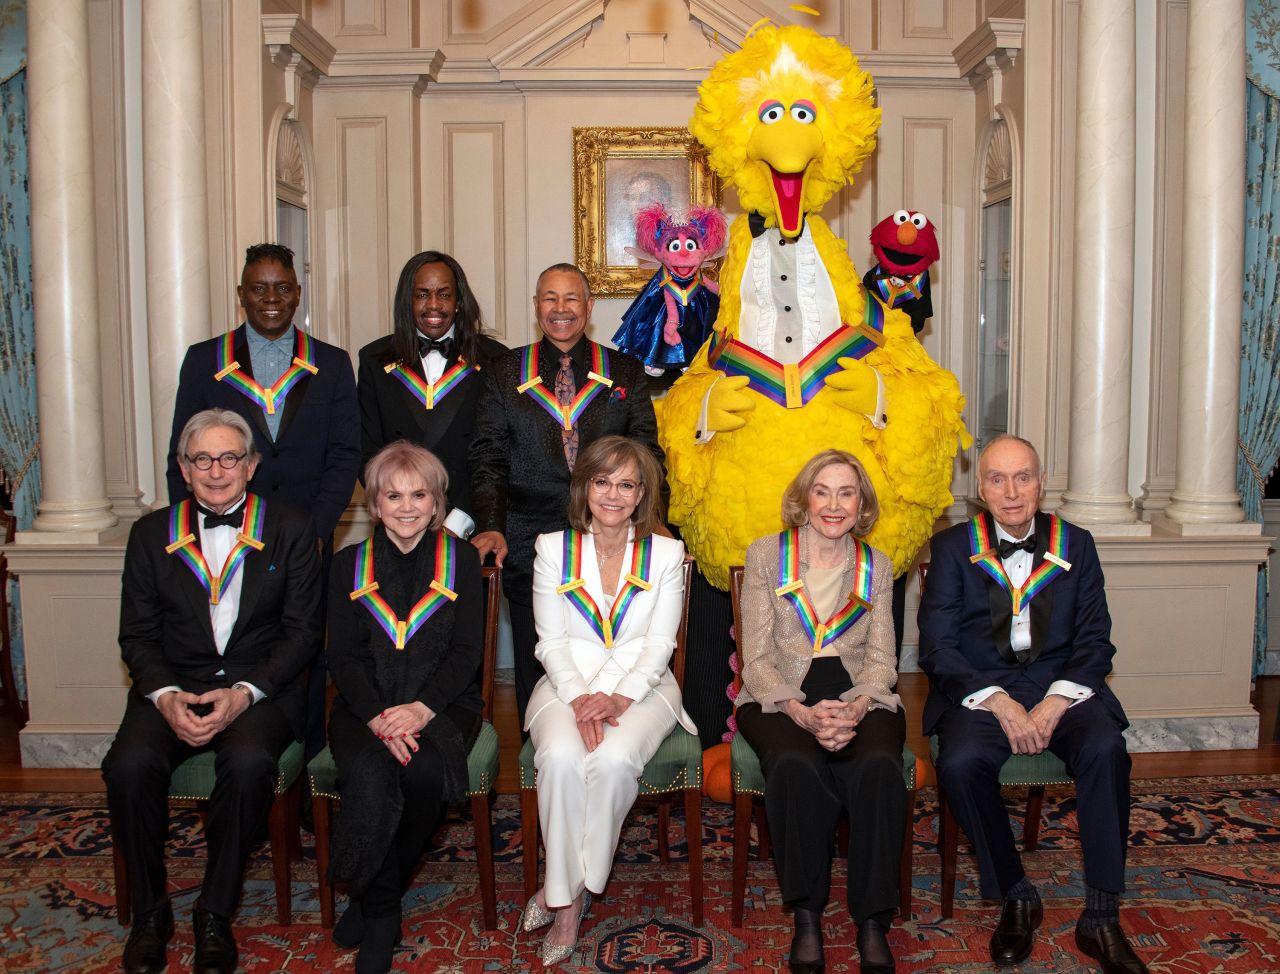 Field, front center, is recognized at the 2019 Kennedy Center Honors. Behind her, in the back row from left, are Earth Wind & Fire members Philip Bailey, Verdine White and Ralph Johnson, and "Sesame Street" characters Abby, Big Bird and Elmo. In the front row, from left, are Michael Tilson Thomas, Linda Ronstadt, Field, Joan Ganz Cooney and Dr. Lloyd Morrisett.